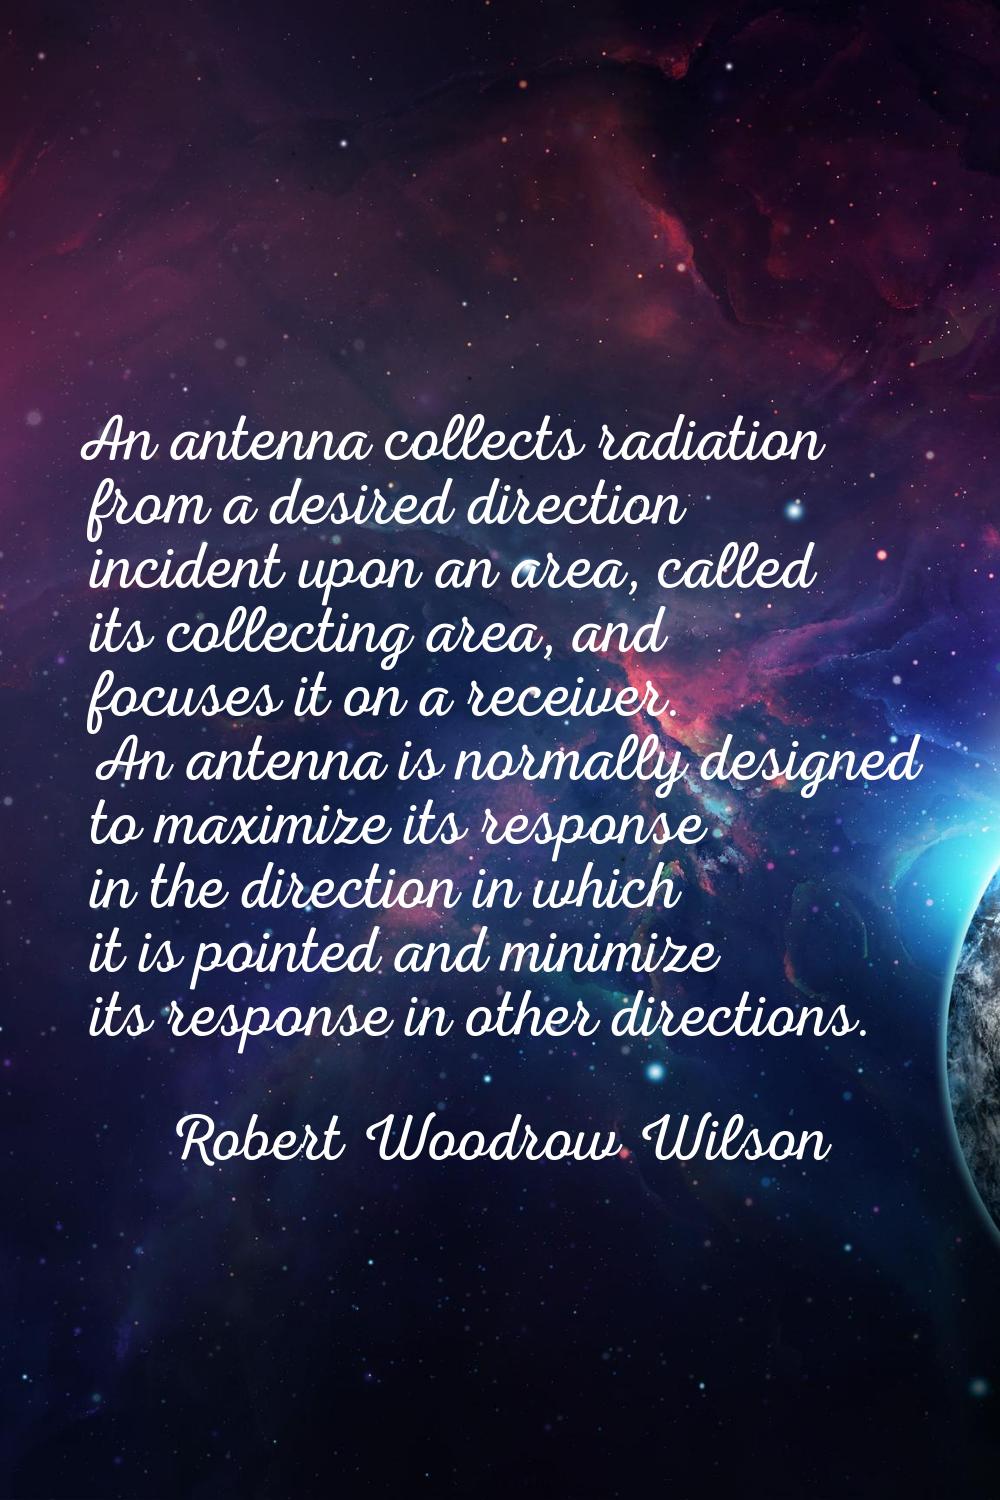 An antenna collects radiation from a desired direction incident upon an area, called its collecting